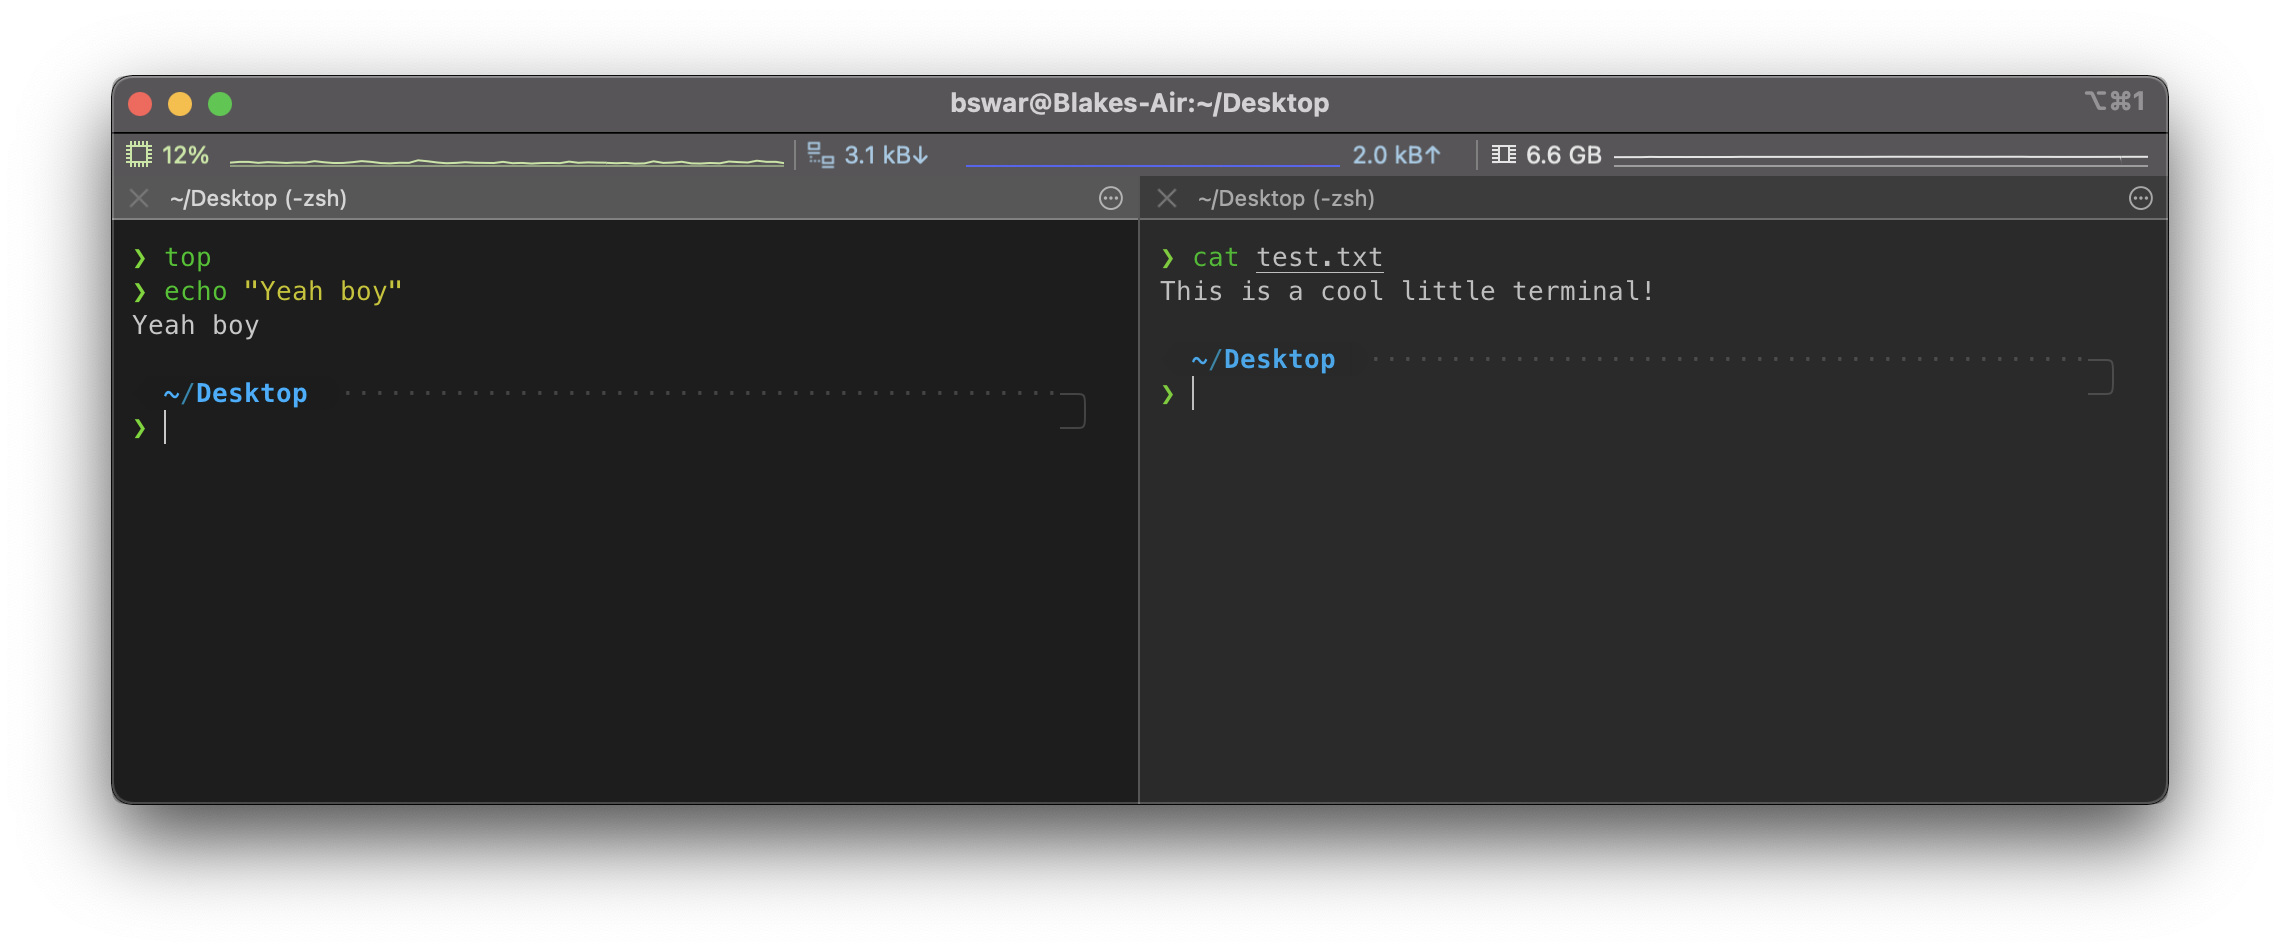 A window showing the iTerm terminal, with 2 panes, split vertically. The first pane shows the "top" command being executed, along with "echo 'Yeah boy'". The second pane shows "cat test.txt" being executed, the output being "This is a cool little terminal!".